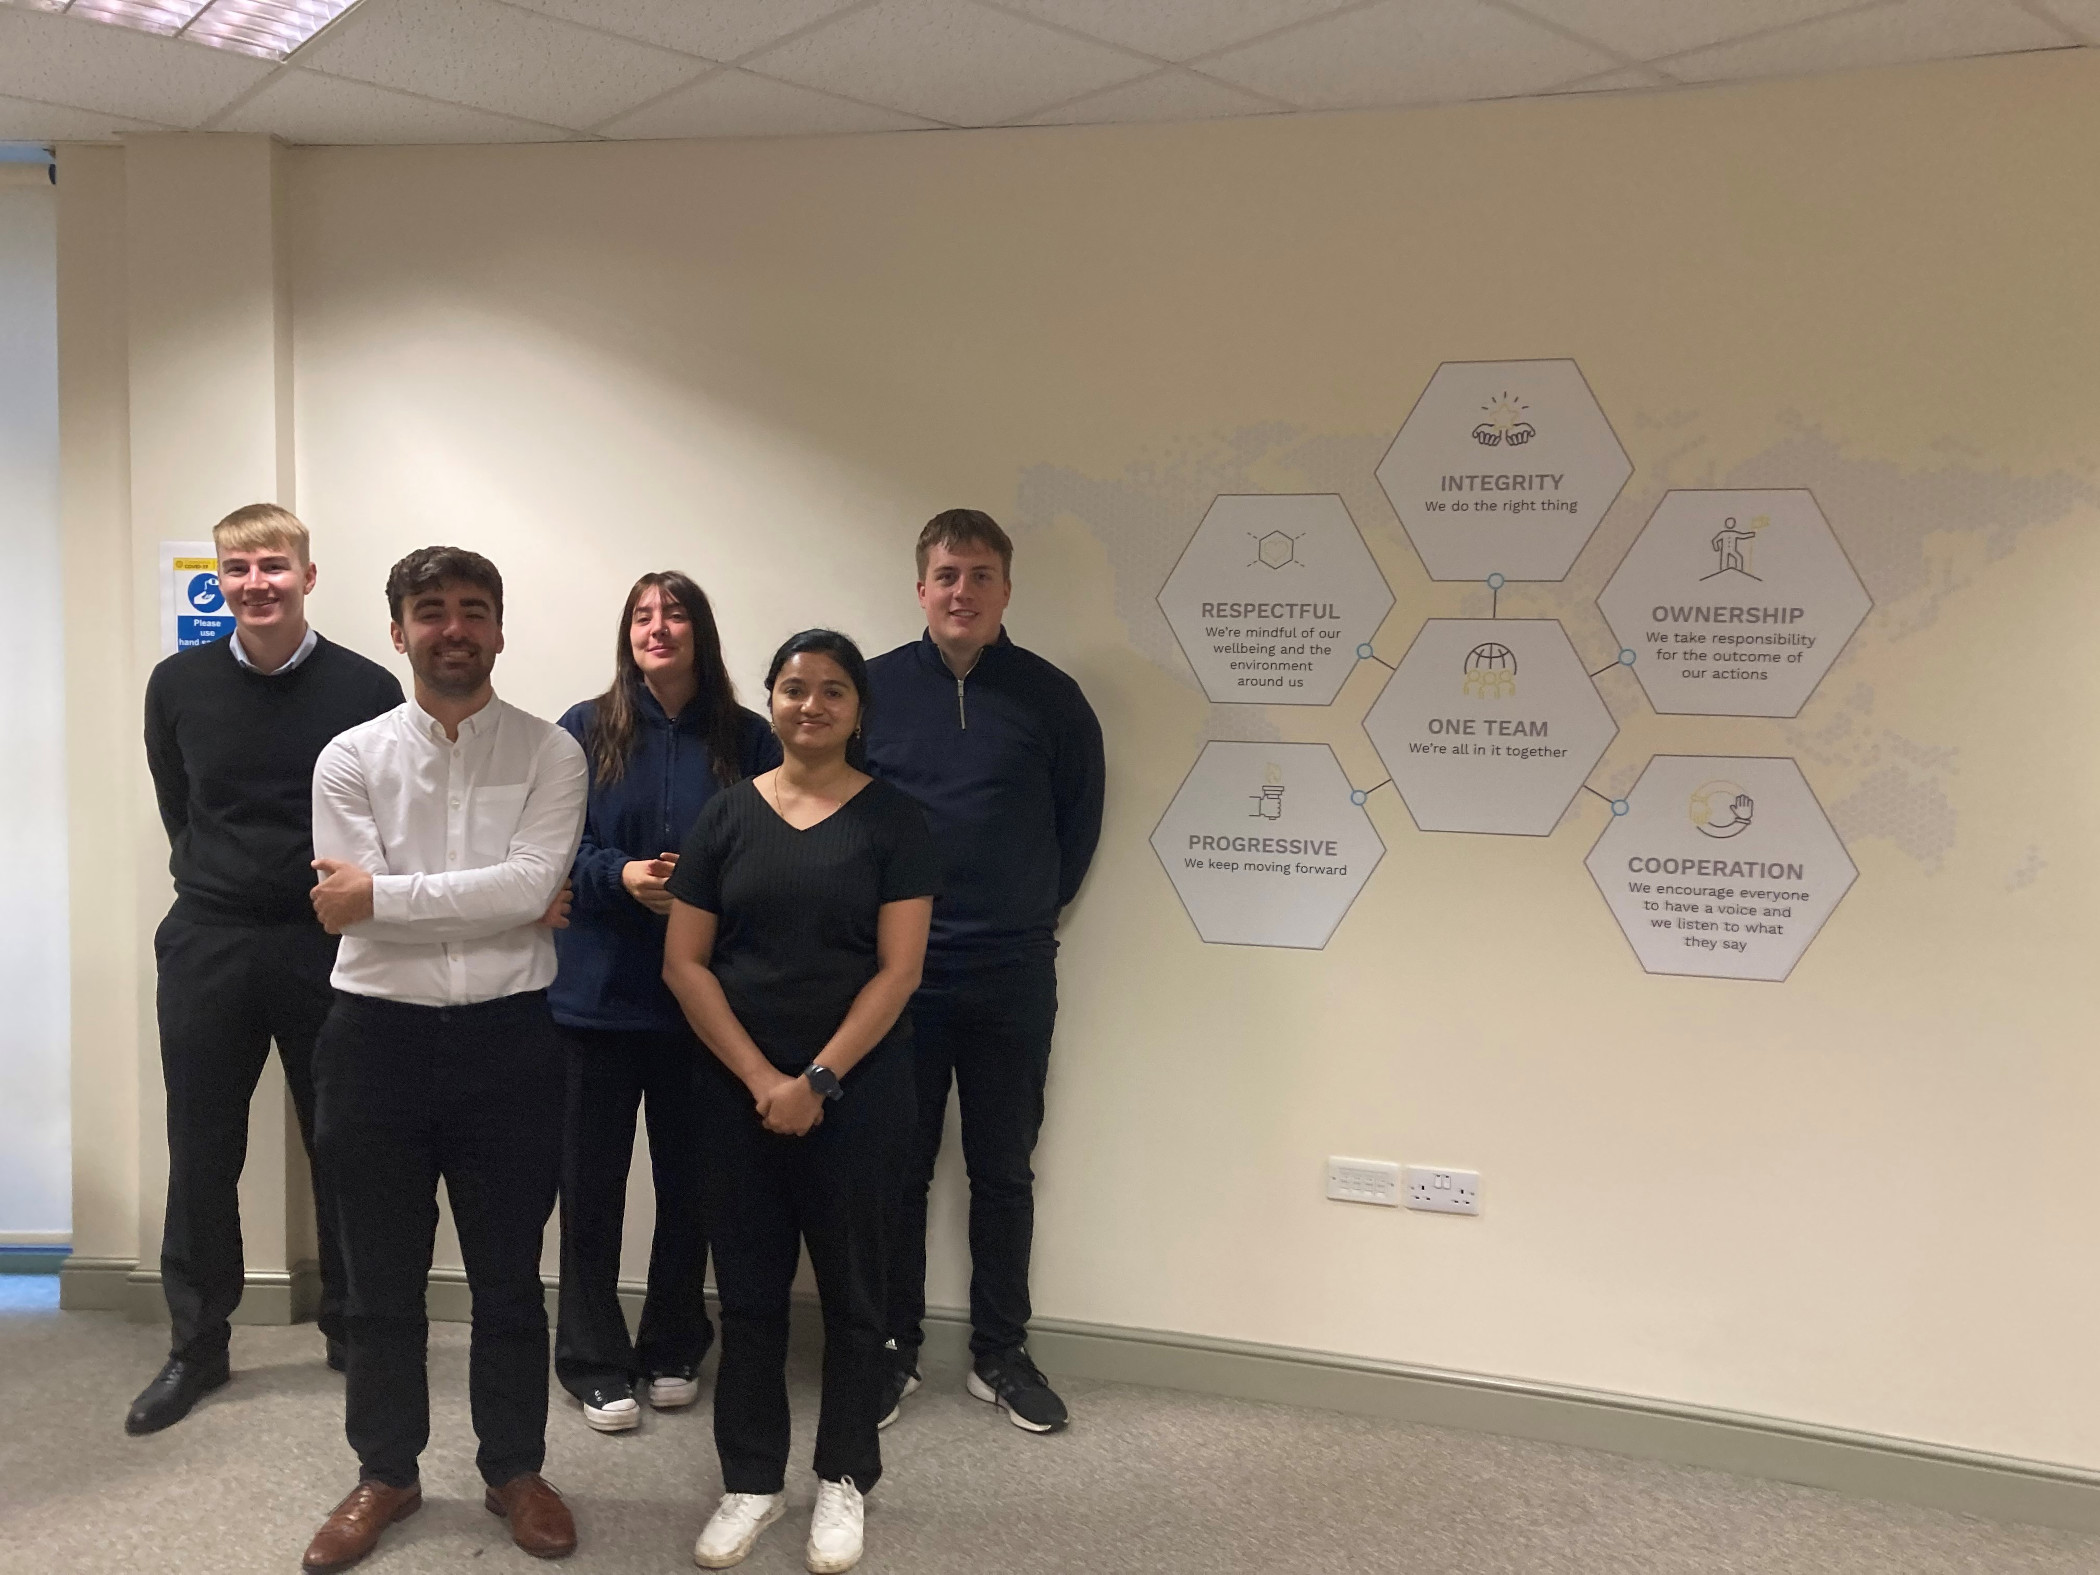 Five new graduate hires have joined Ovarro. They are Riven Knight, Katie Hudson, Sam Fewster (back row left to right), Marco Difelice and Anjali Mukesh (front row left to right).